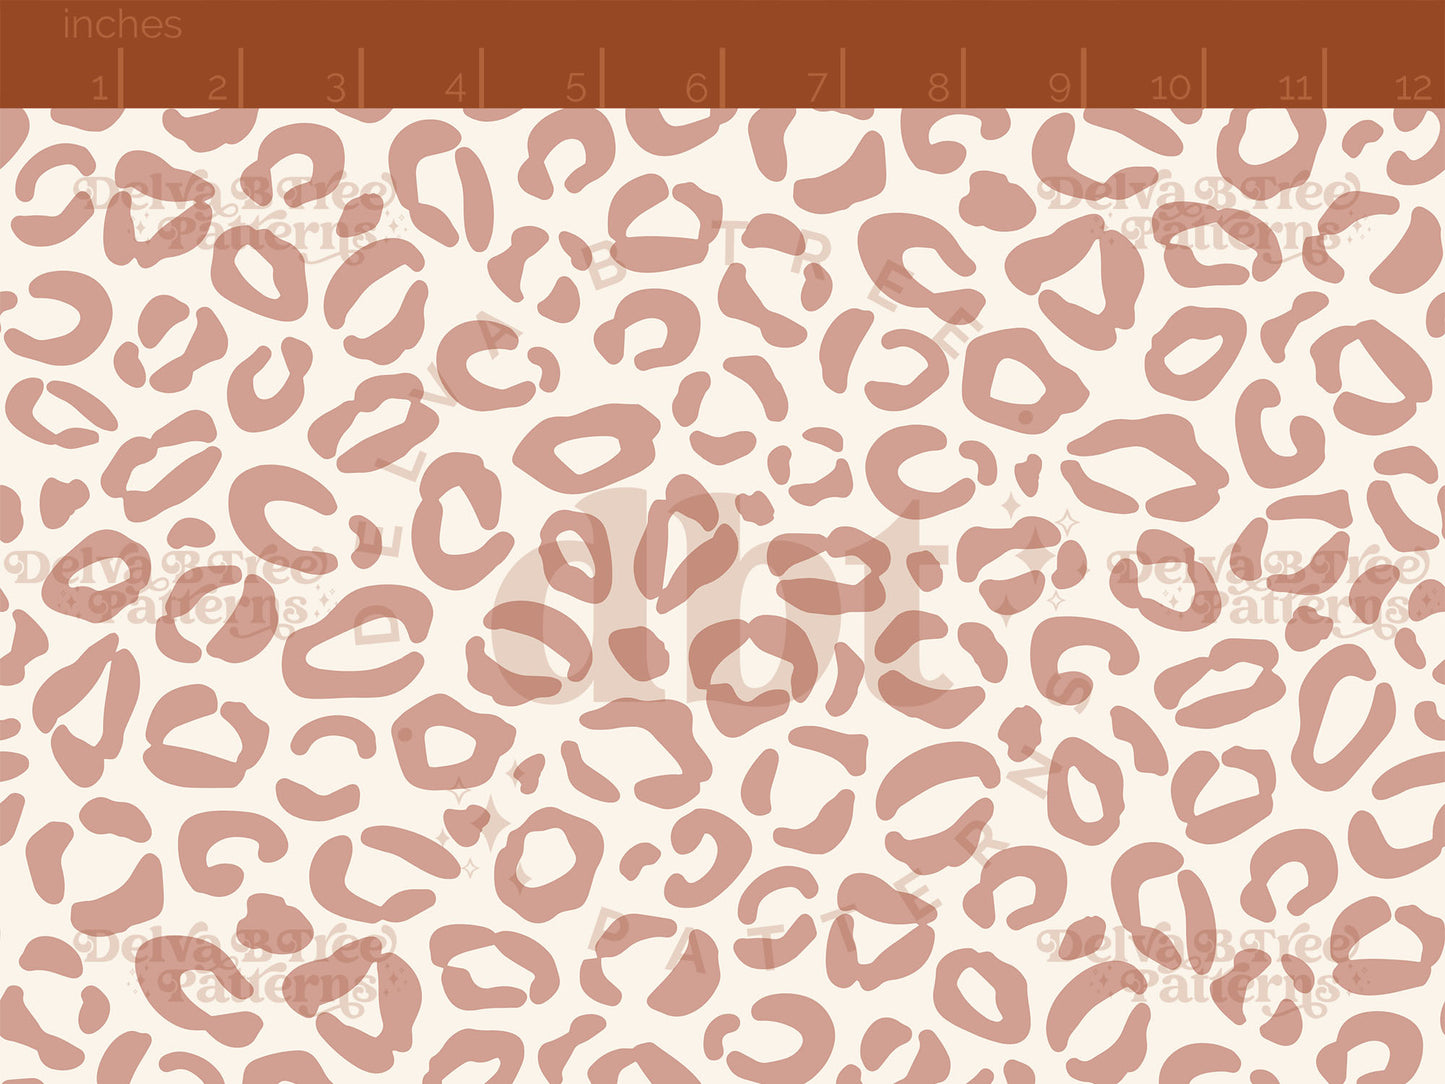 Dusty rose and cream leopard print seamless pattern scale digital file for small shops that make handmade products in small batches.